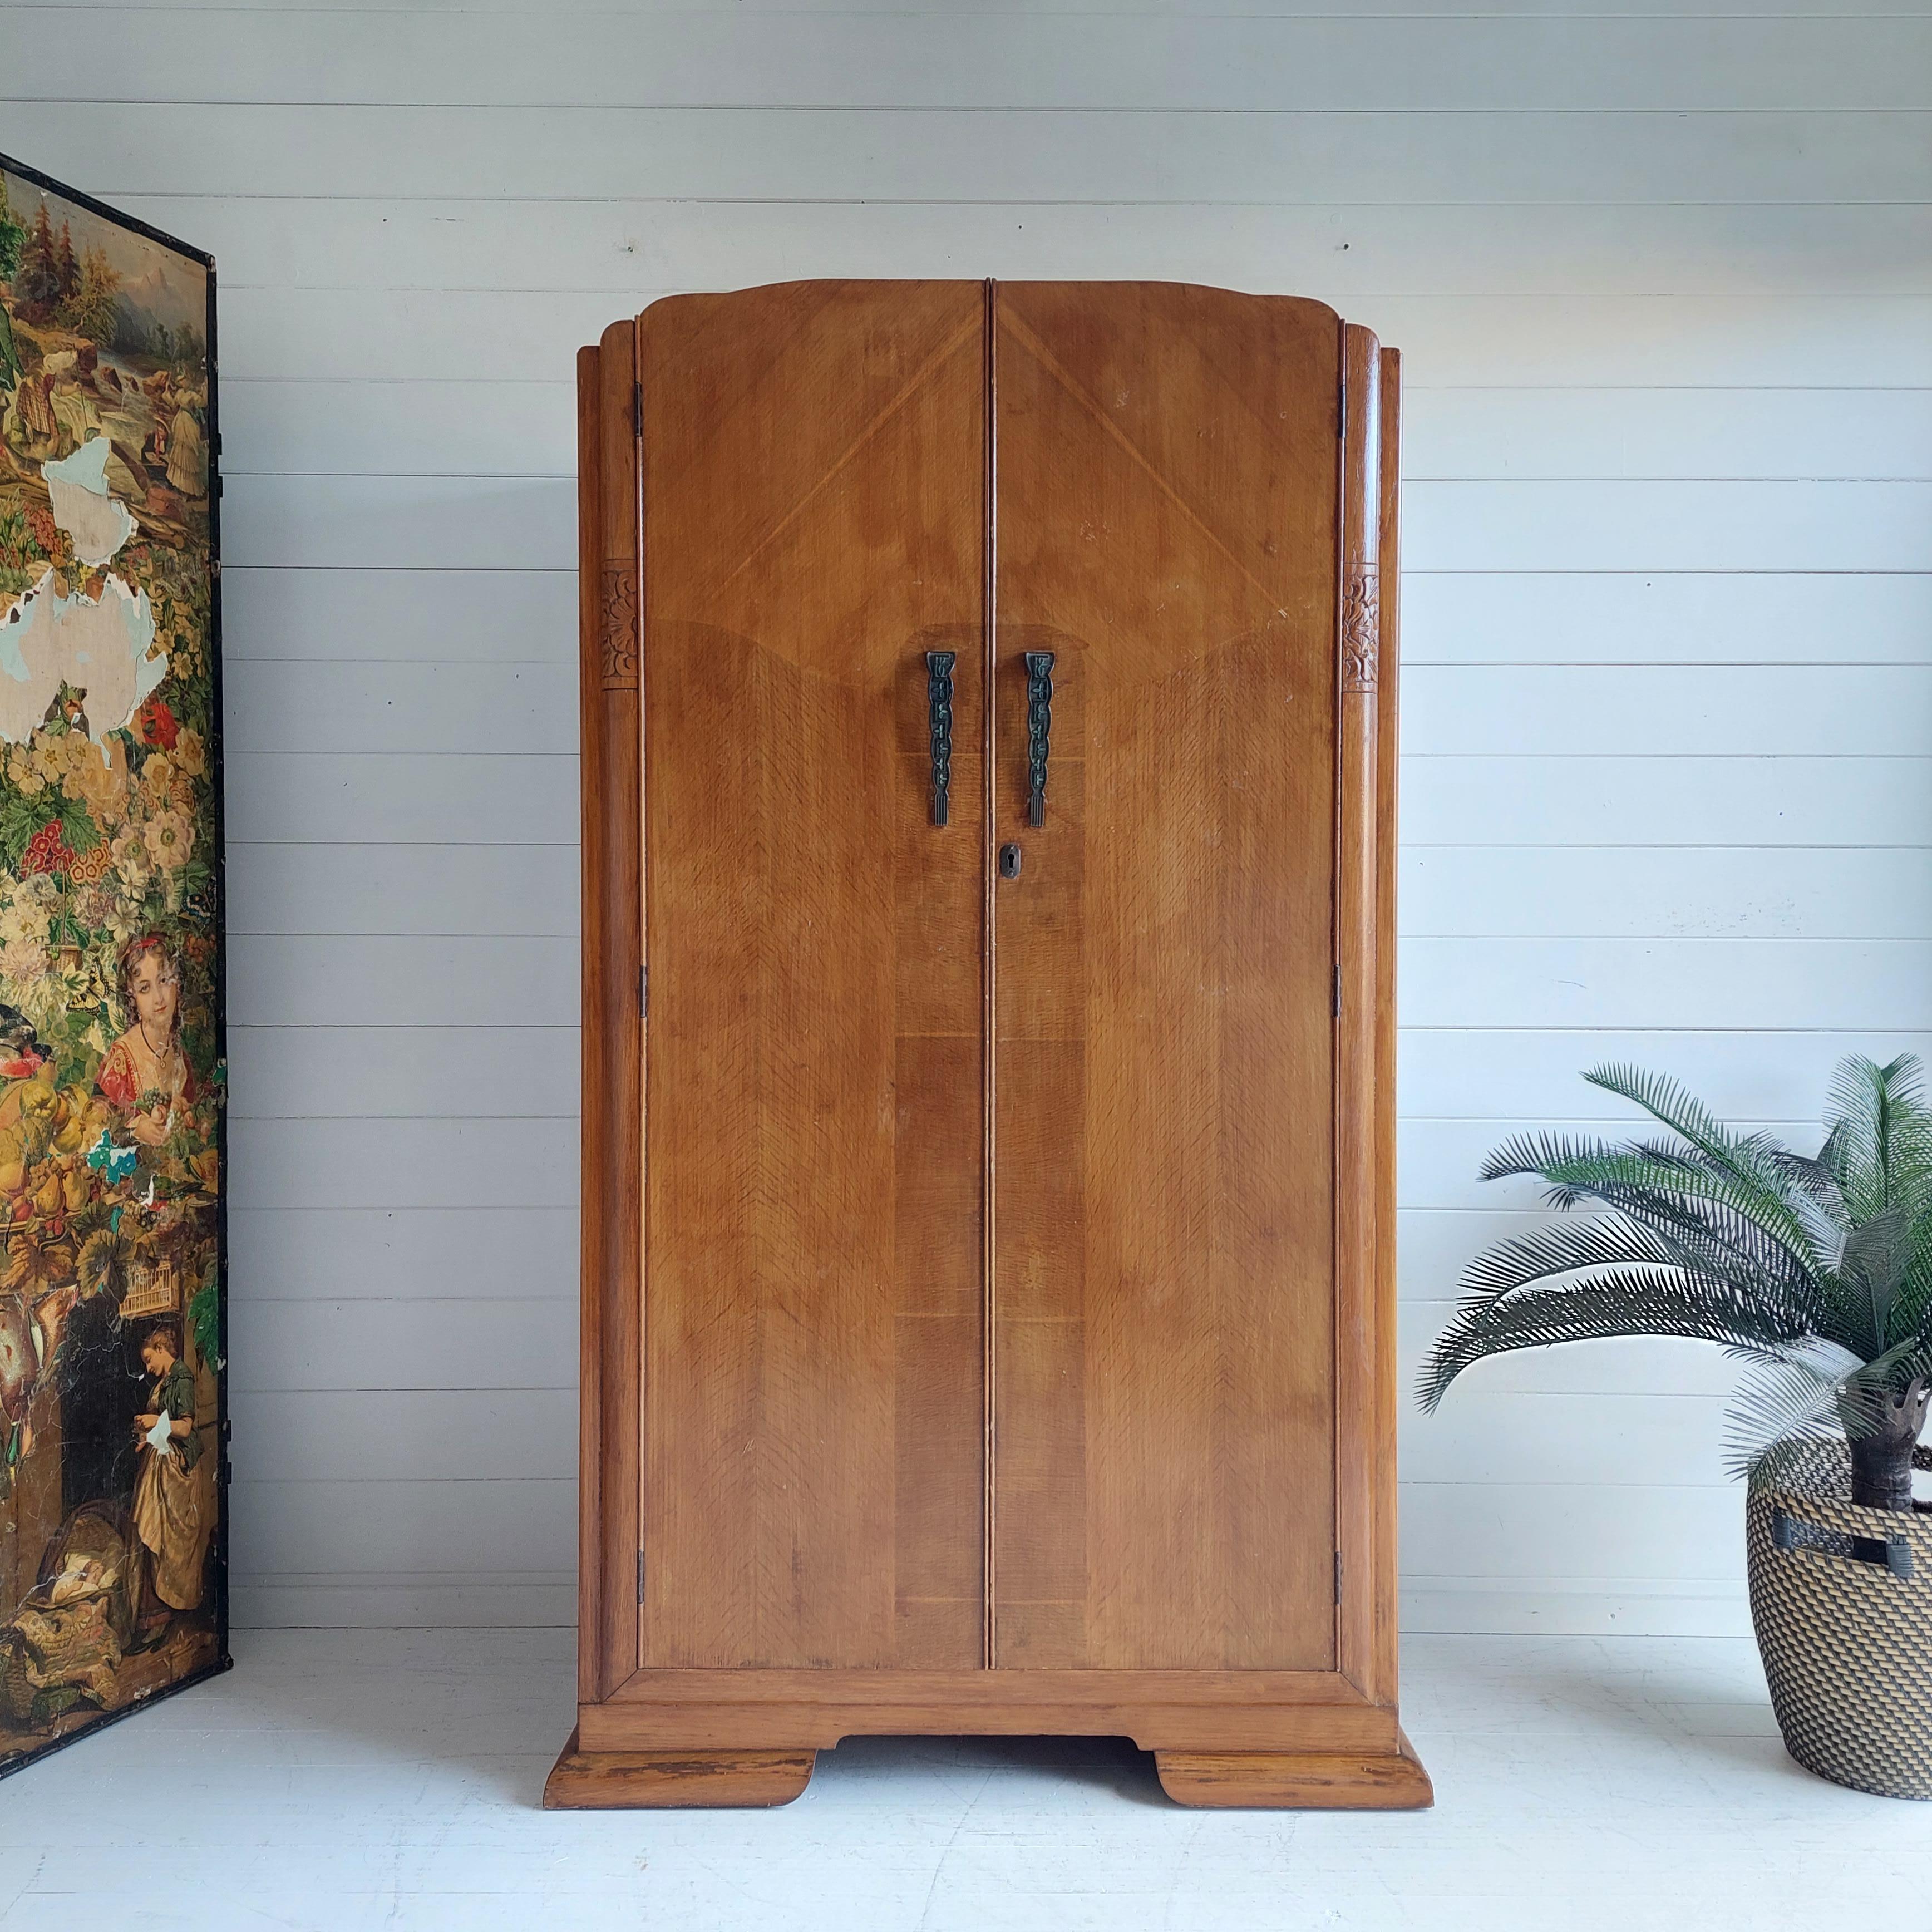 Late Art Nuveau/Art Deco Single Wardrobe.
This was made probably in England, it dates from the 1930’s.

Standing Upon a Shaped Plinth.
Featuring 2 Highly Figured oak Doors with a Shaped Closing Mould, the Doors Retain their Original Art Deco/